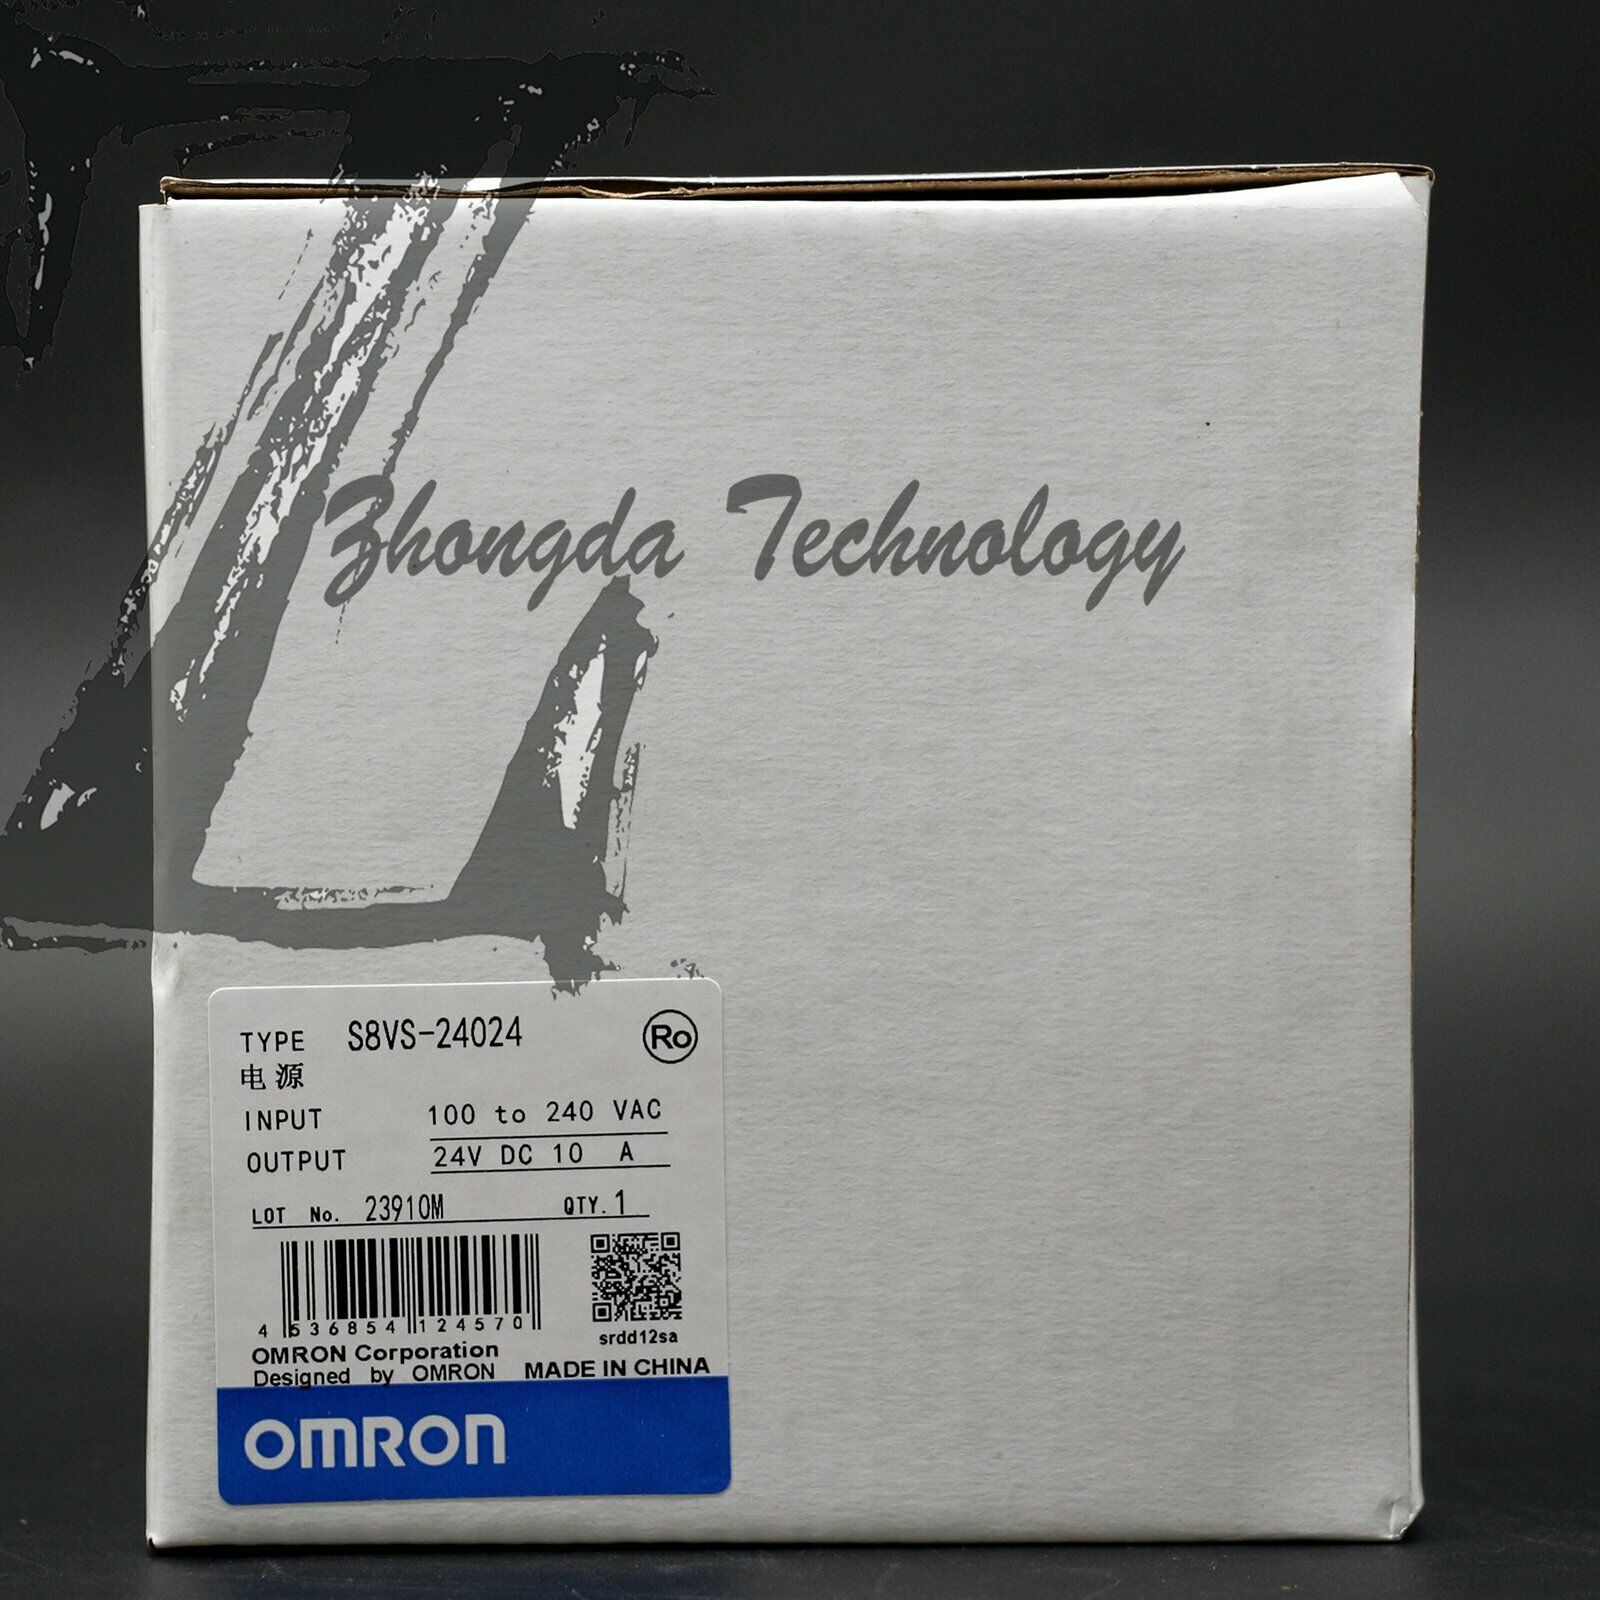 1PC NEW Omron S8VS-24024 S8VS24024 switching power supply One year warranty KOEED $0-100, 90%, import_2020_10_10_031751, OMRON, PLC, S8VS